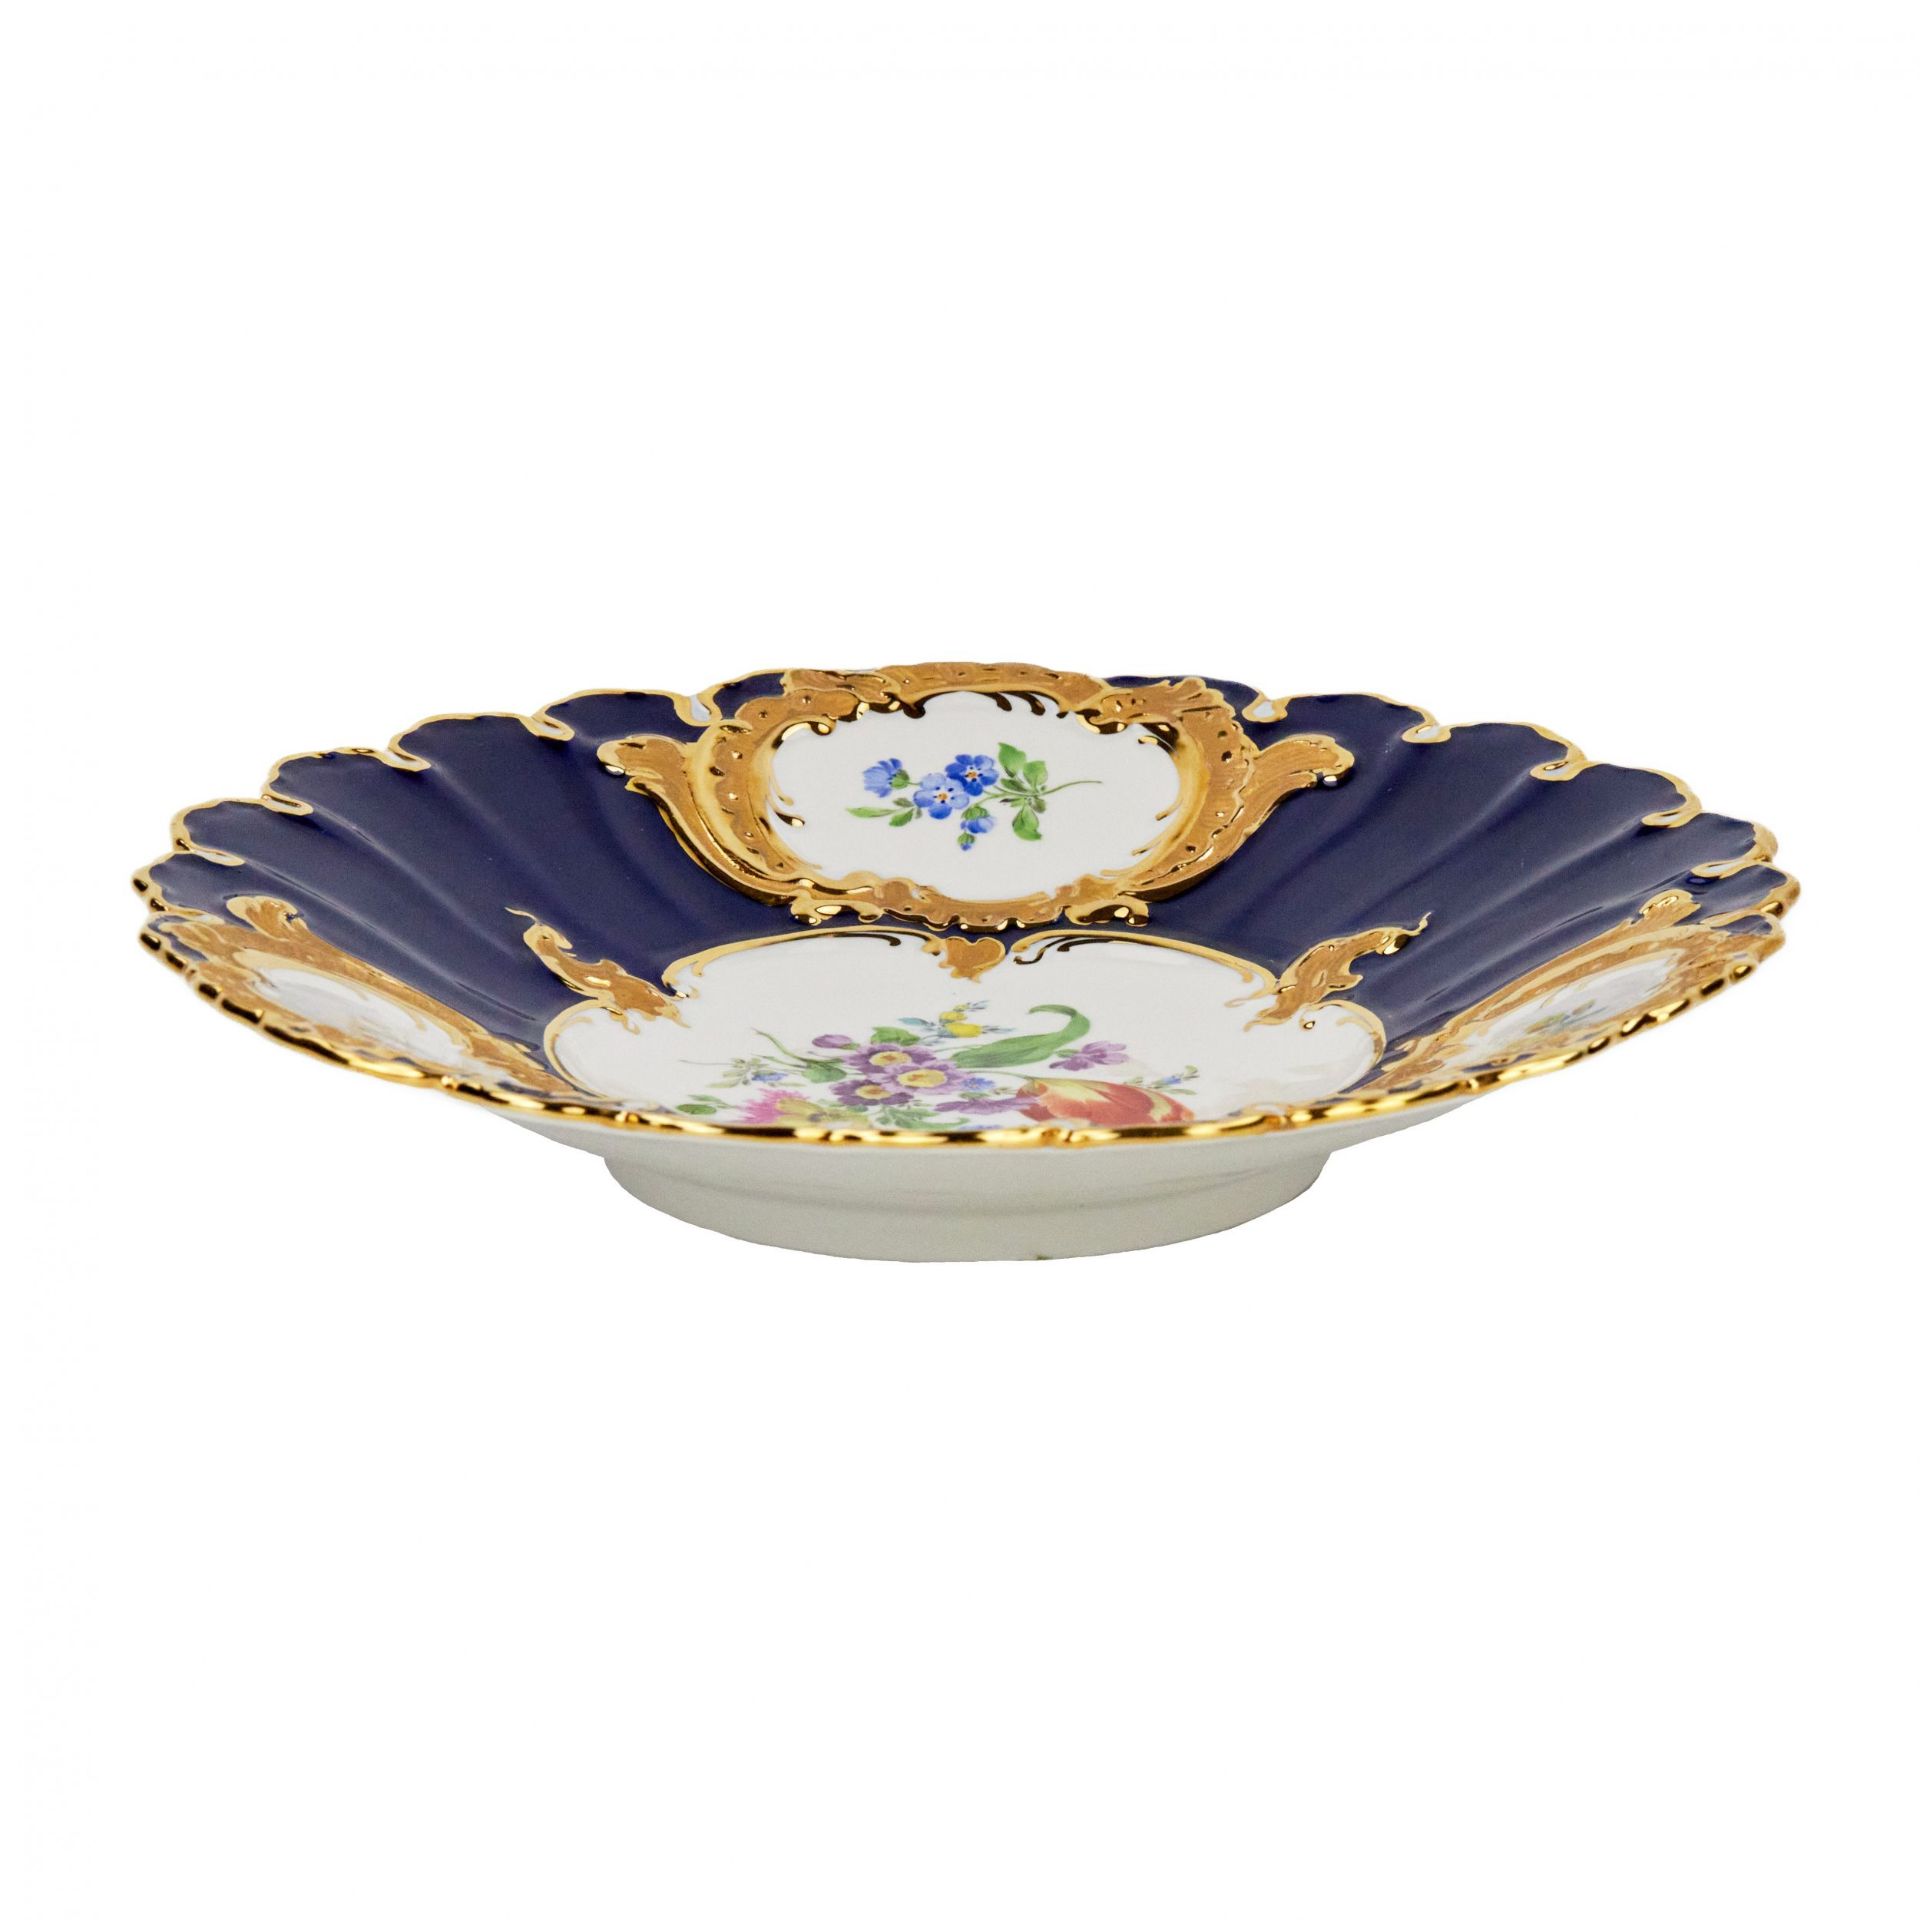 Gorgeous cobalt blue Meissen dish with gilding and delicate painting. 20th century. - Image 3 of 4